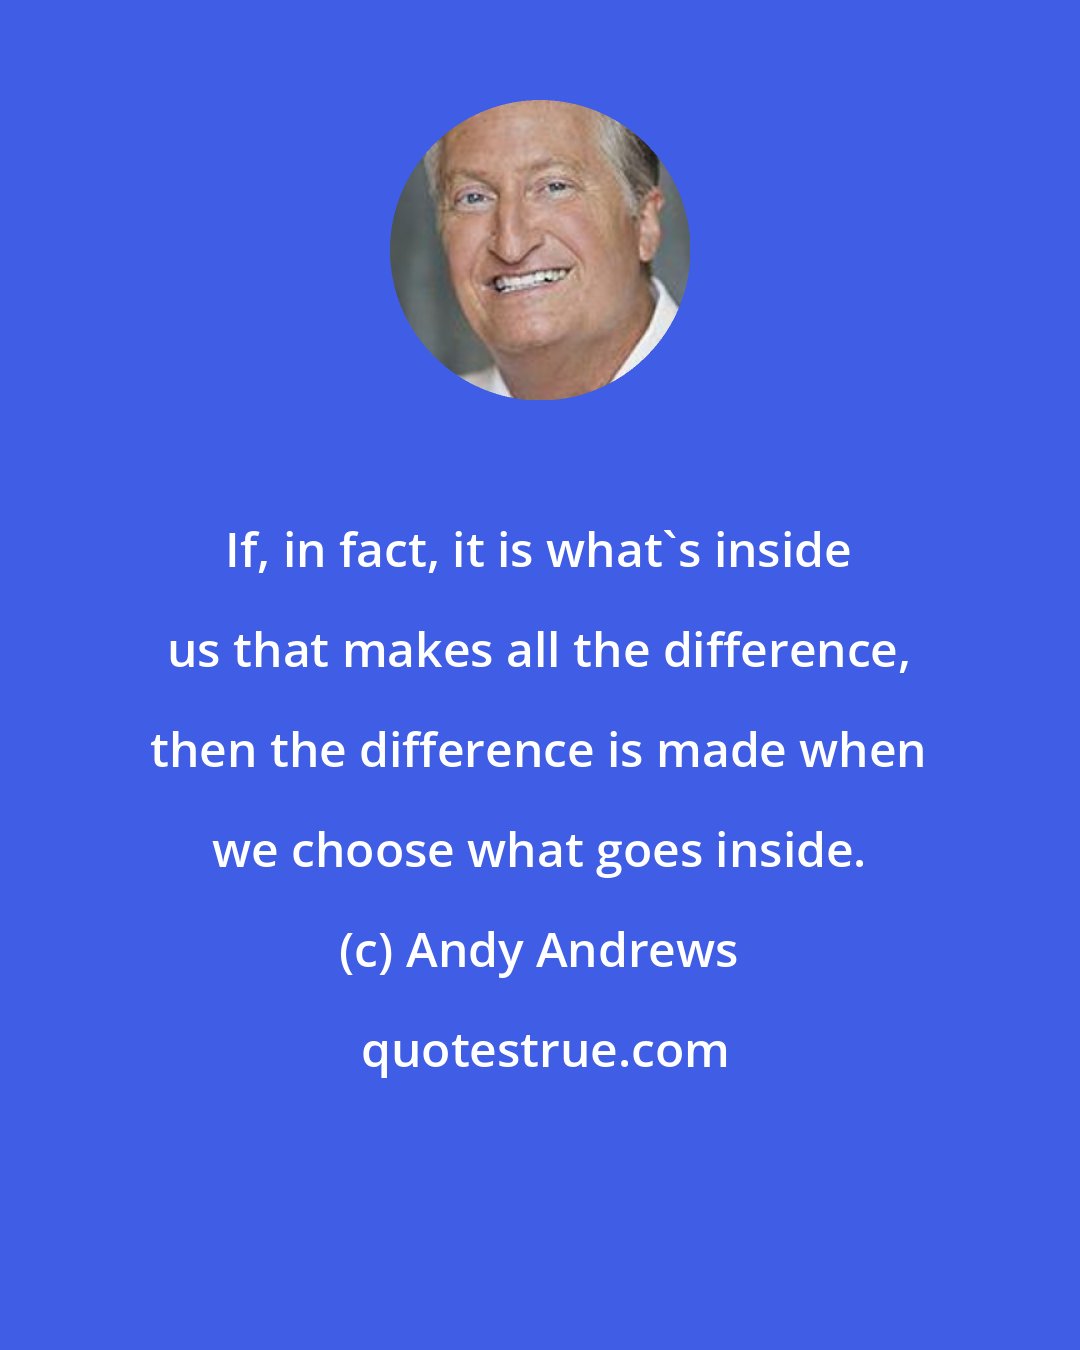 Andy Andrews: If, in fact, it is what's inside us that makes all the difference, then the difference is made when we choose what goes inside.